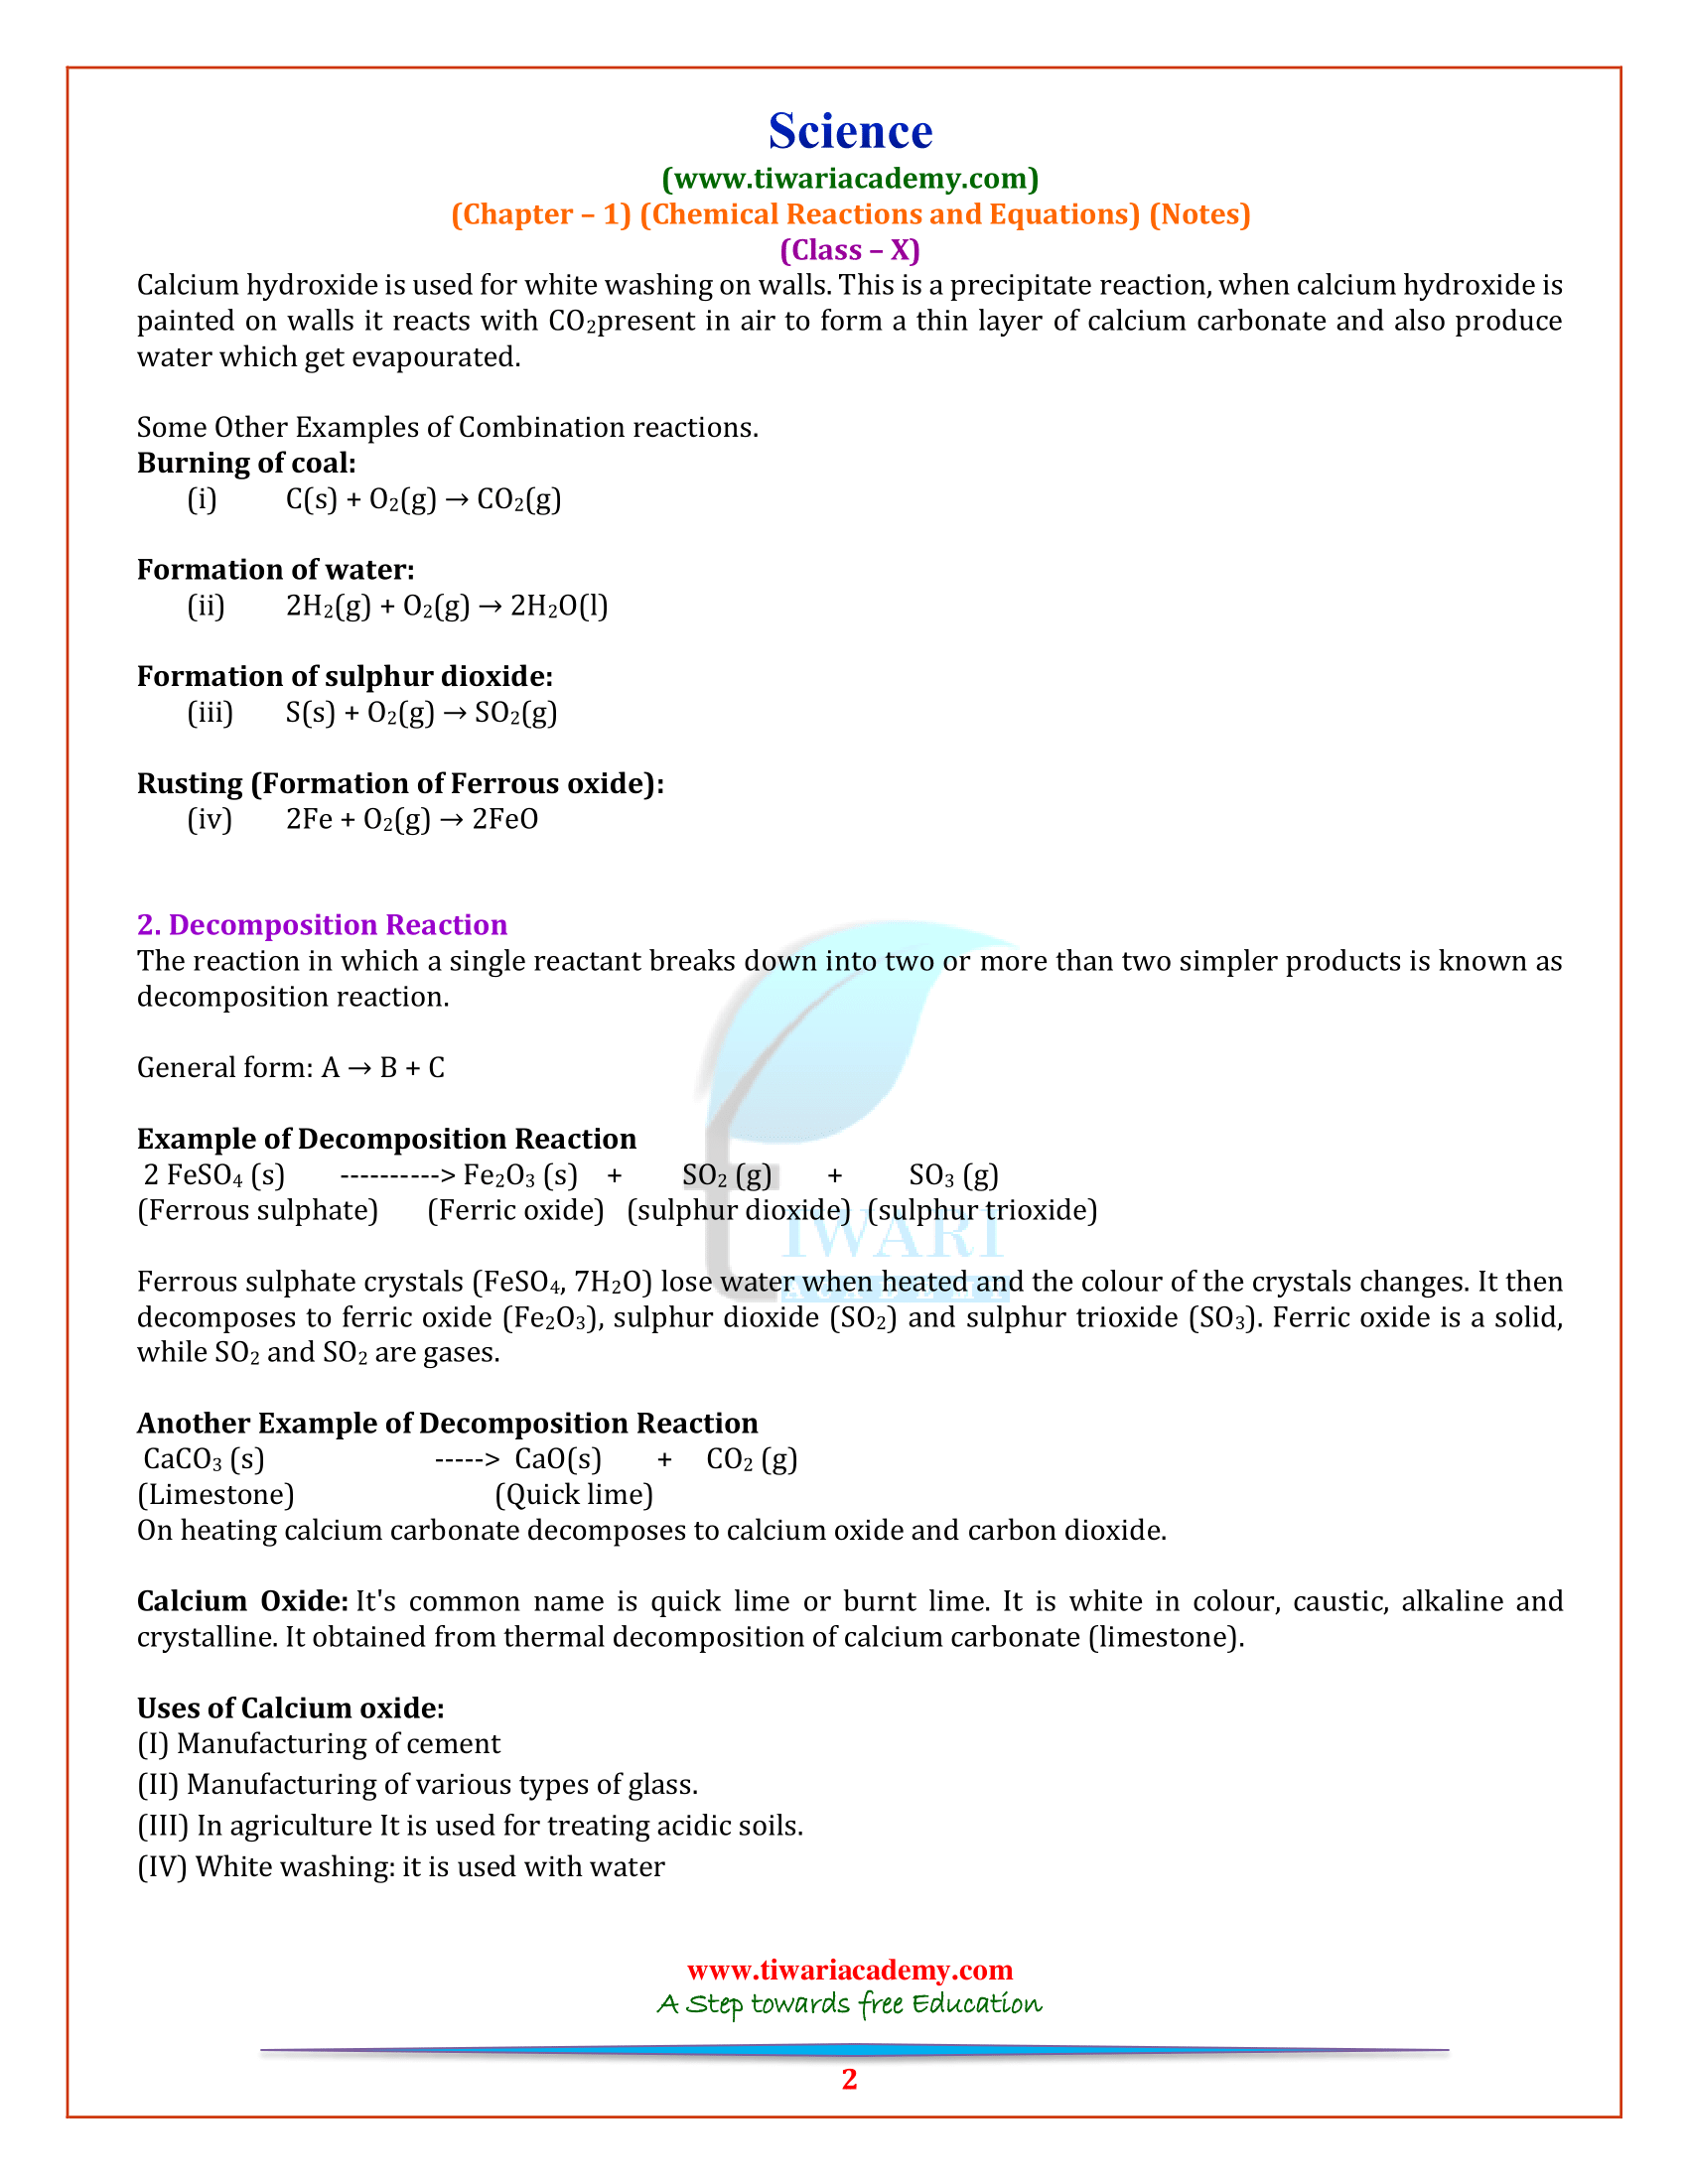 Class 10 Science Chapter 1 Notes